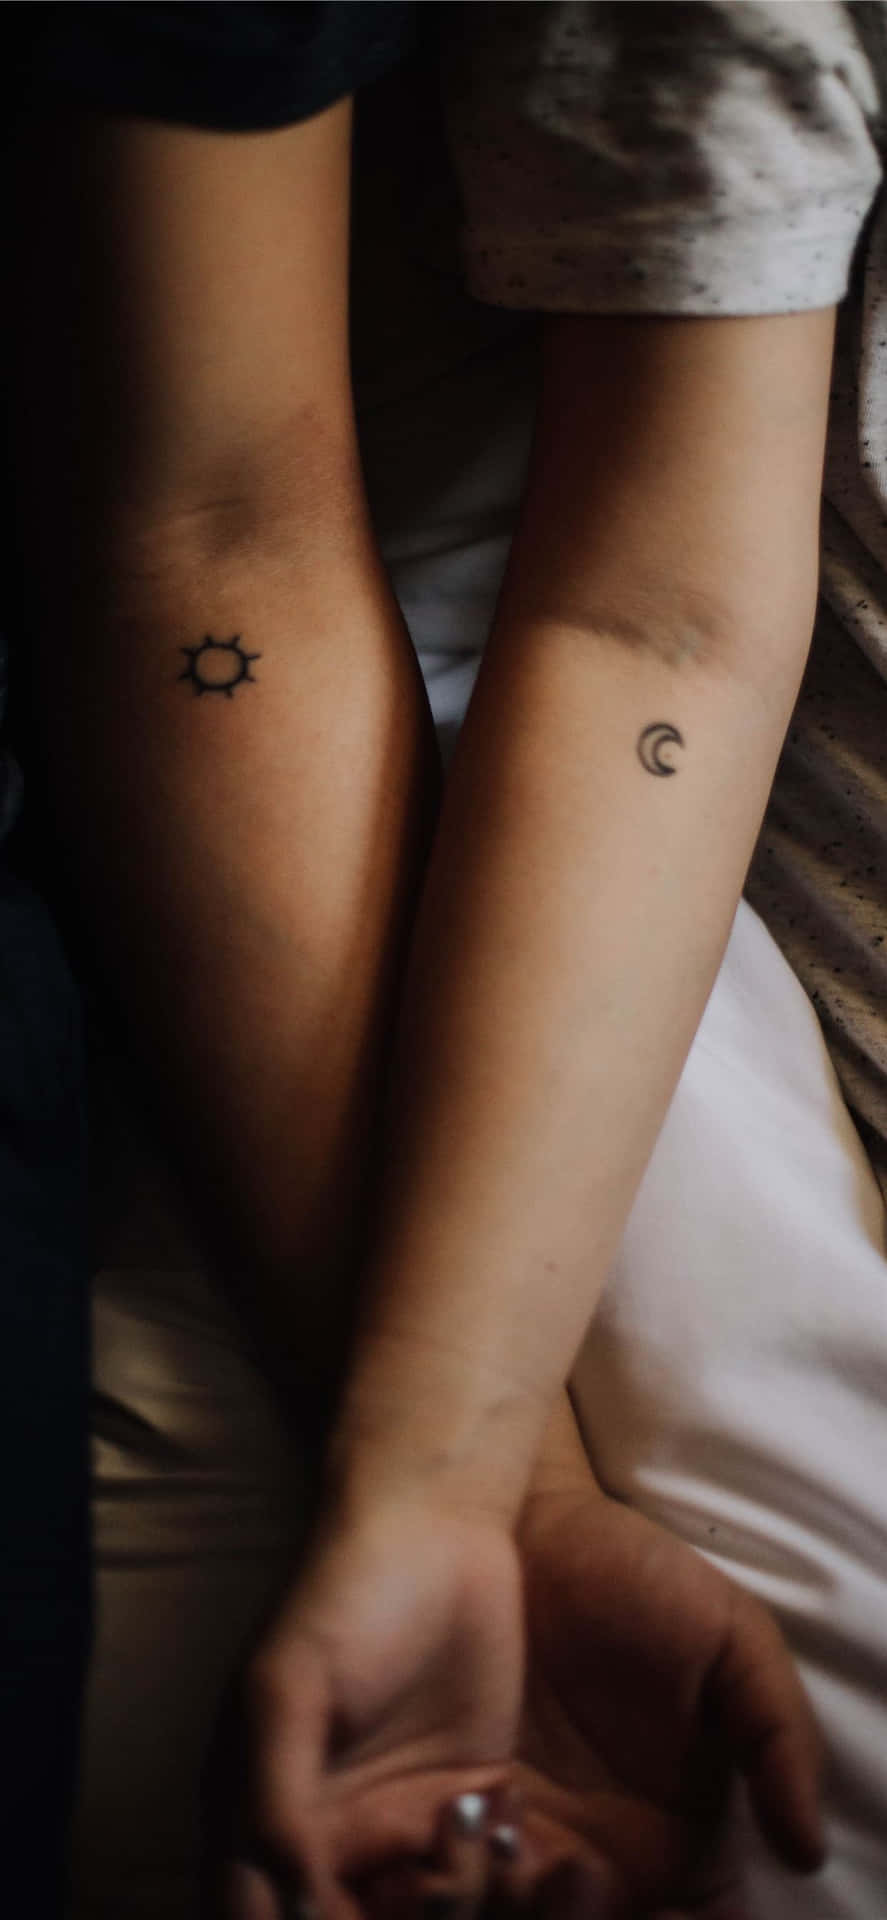 Relationship Goals Tattoos Pictures